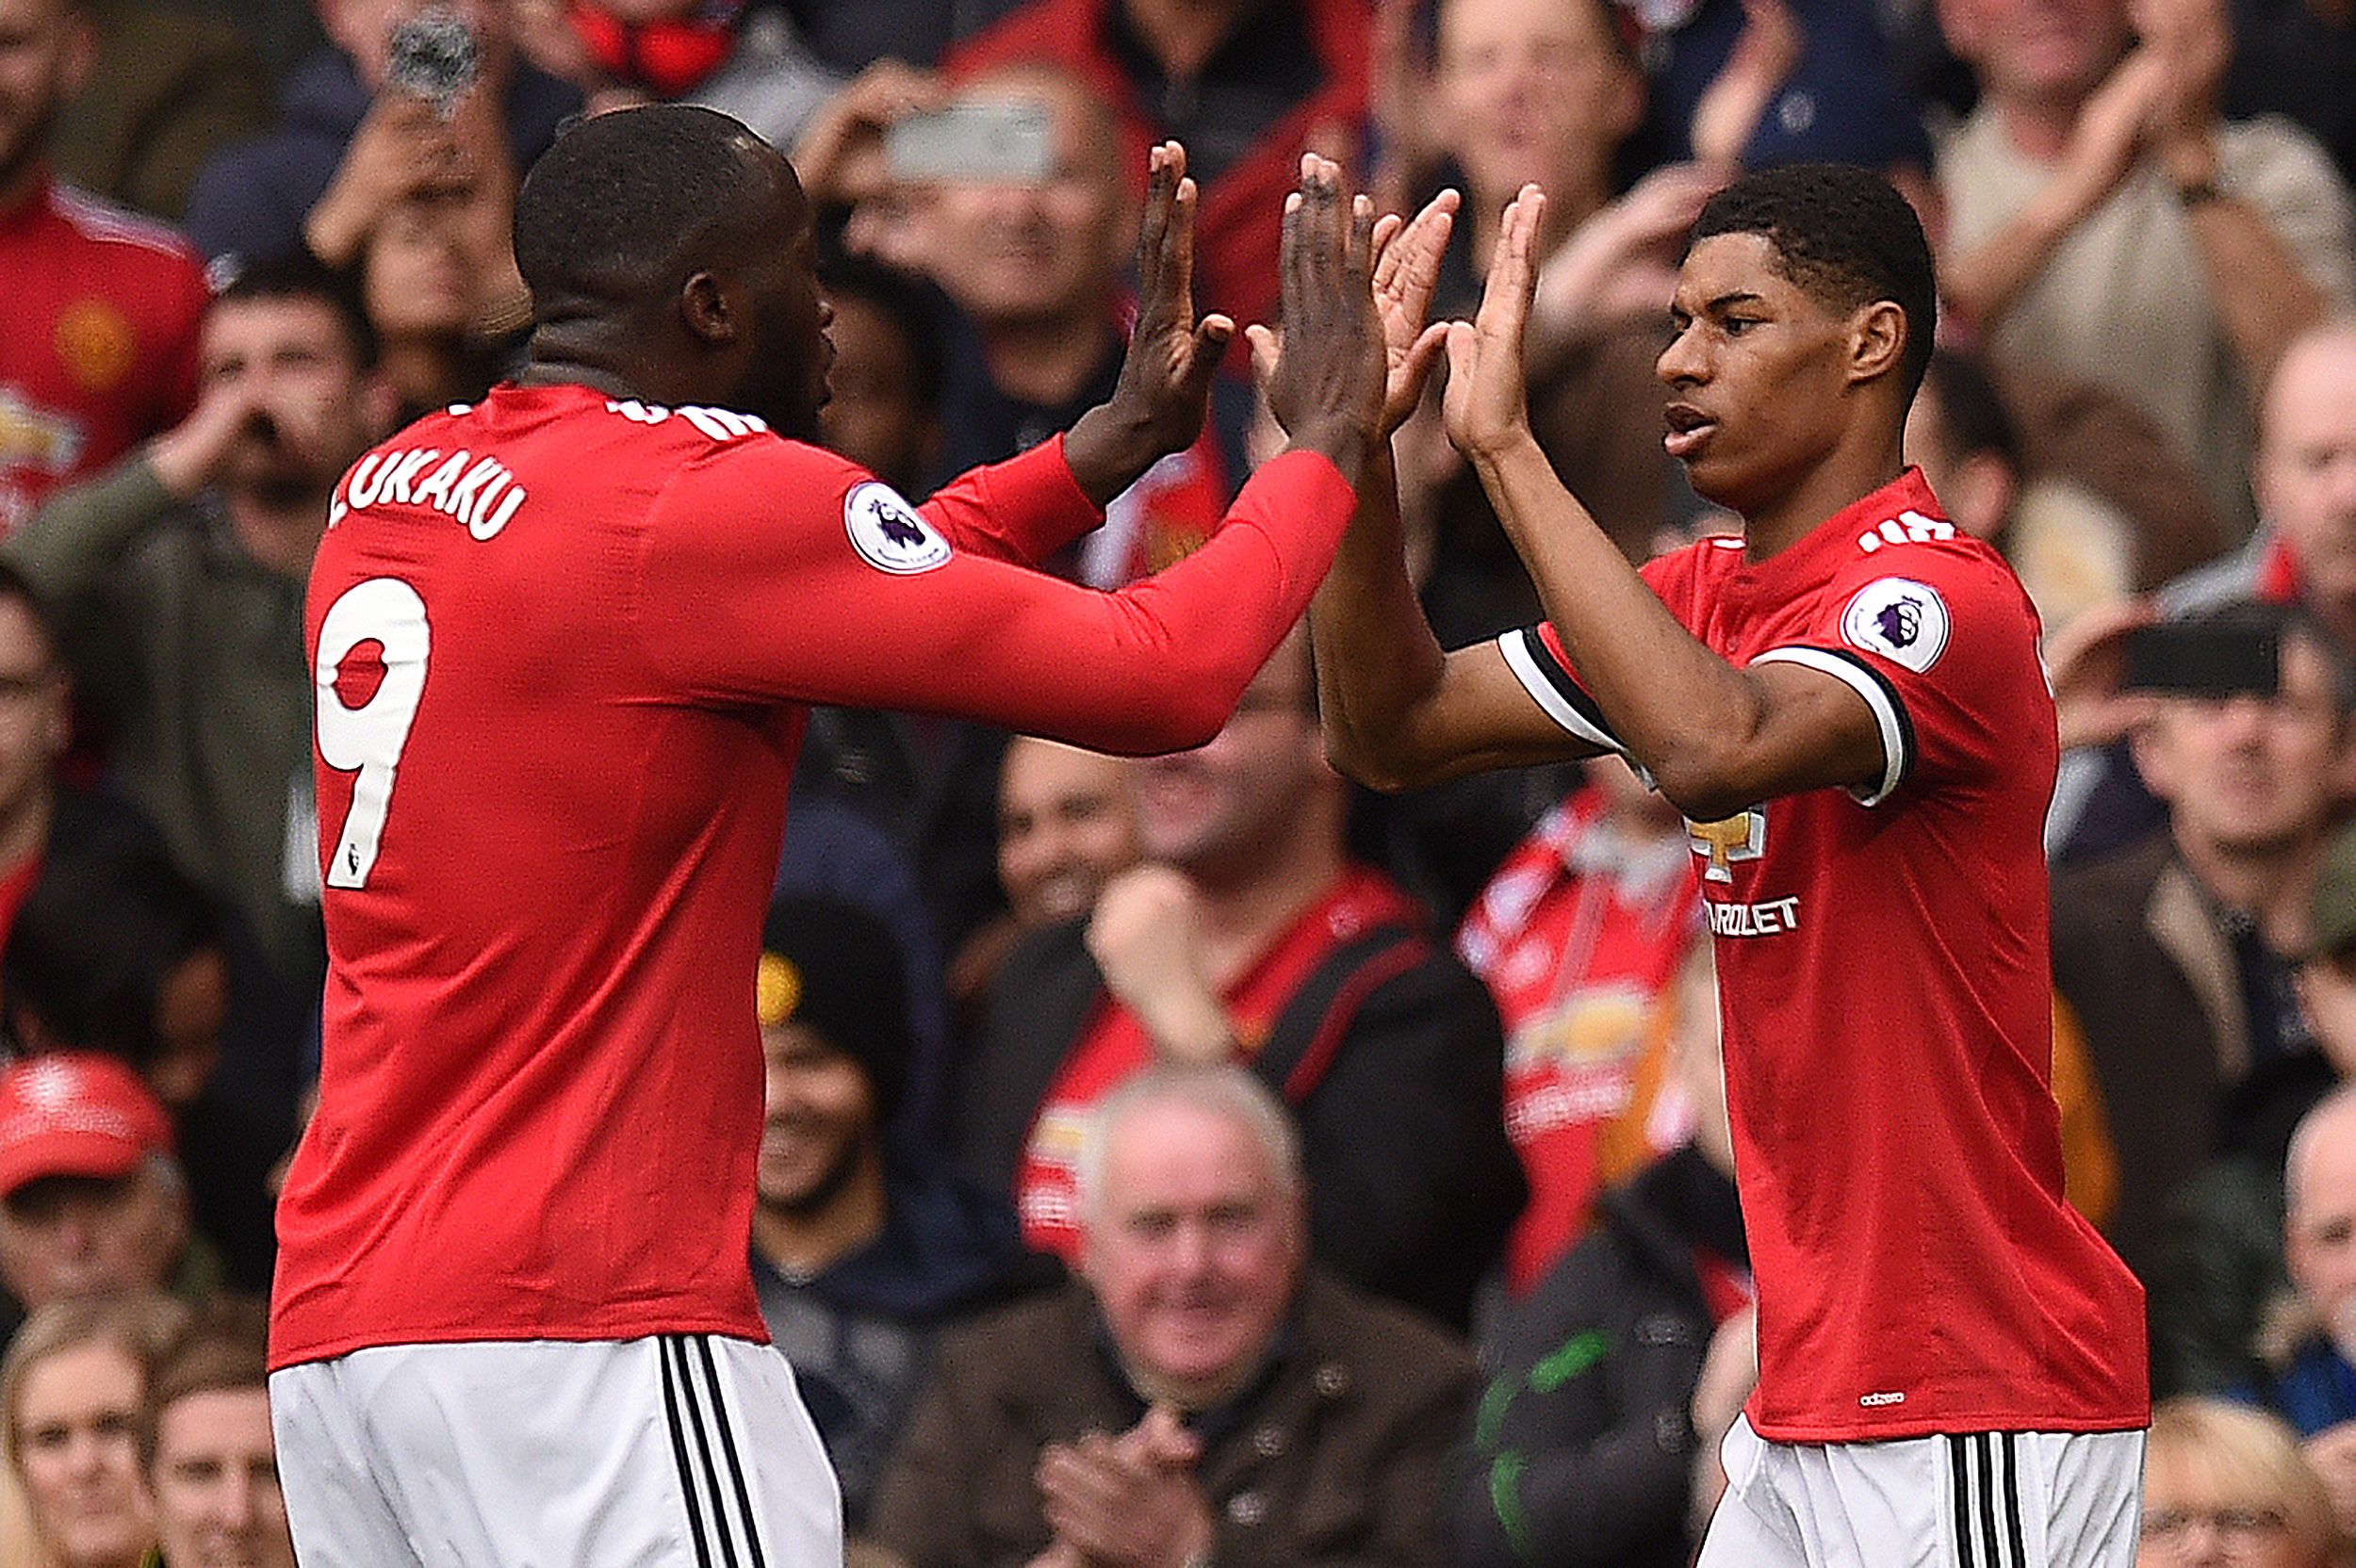 Manchester United's English striker Marcus Rashford (R) celebrates scoring the opening goal with Manchester United's Belgian striker Romelu Lukaku (L) during the English Premier League football match between Manchester United and Liverpool at Old Trafford in Manchester, north west England, on March 10, 2018. / AFP PHOTO / Oli SCARFF / RESTRICTED TO EDITORIAL USE. No use with unauthorized audio, video, data, fixture lists, club/league logos or 'live' services. Online in-match use limited to 75 images, no video emulation. No use in betting, games or single club/league/player publications.  /         (Photo credit should read OLI SCARFF/AFP/Getty Images)